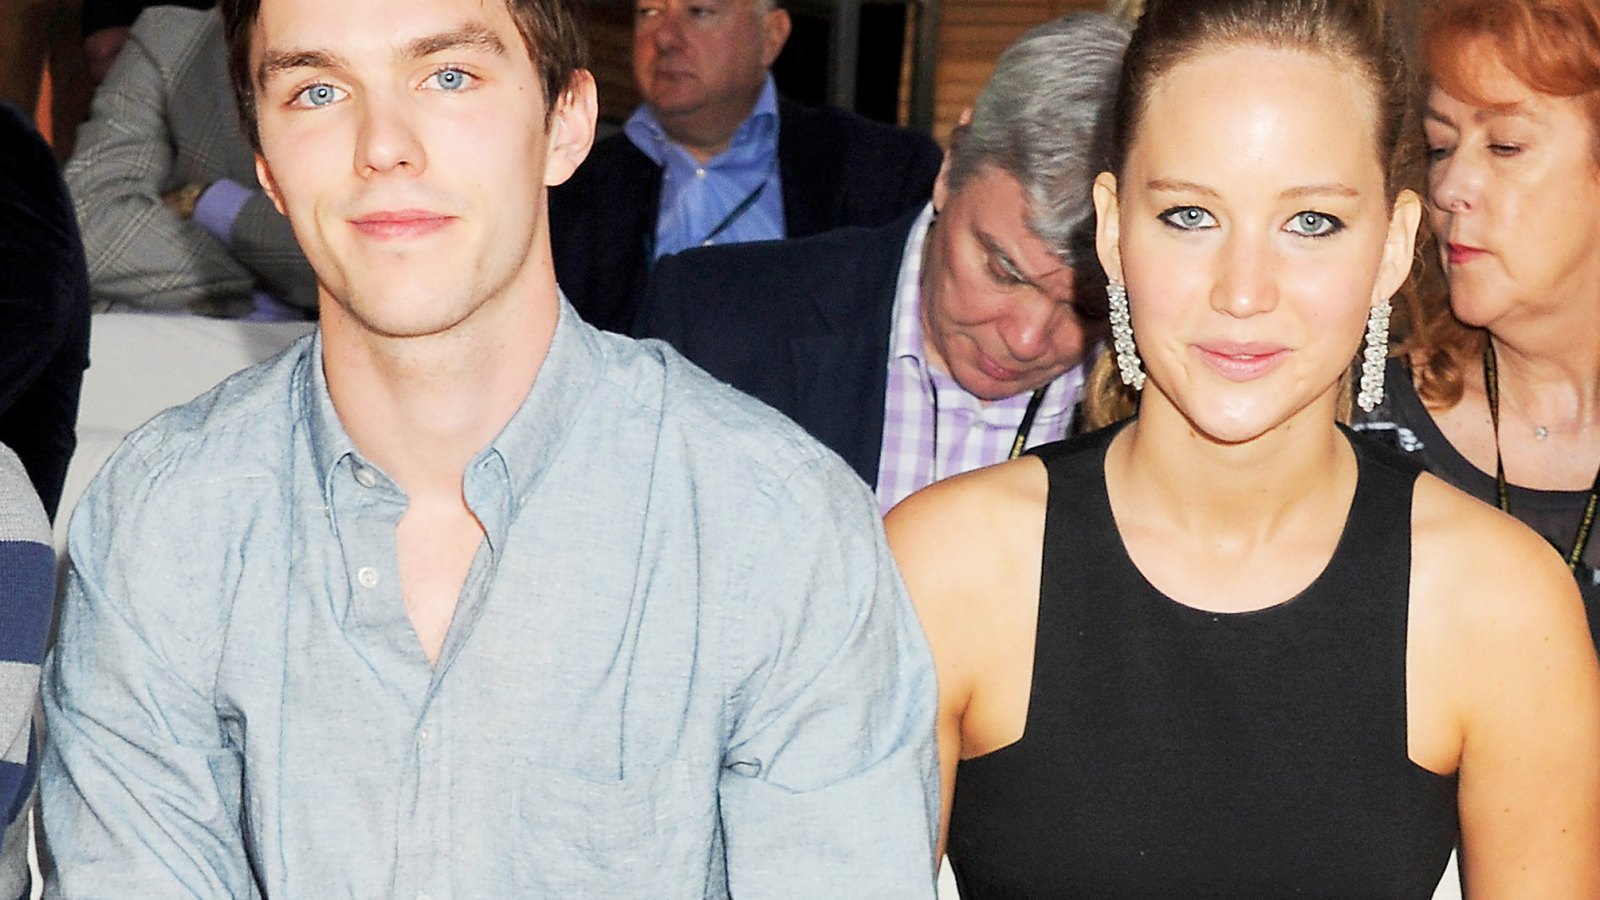 Jennifer Lawrence and Nicholaus Hoult